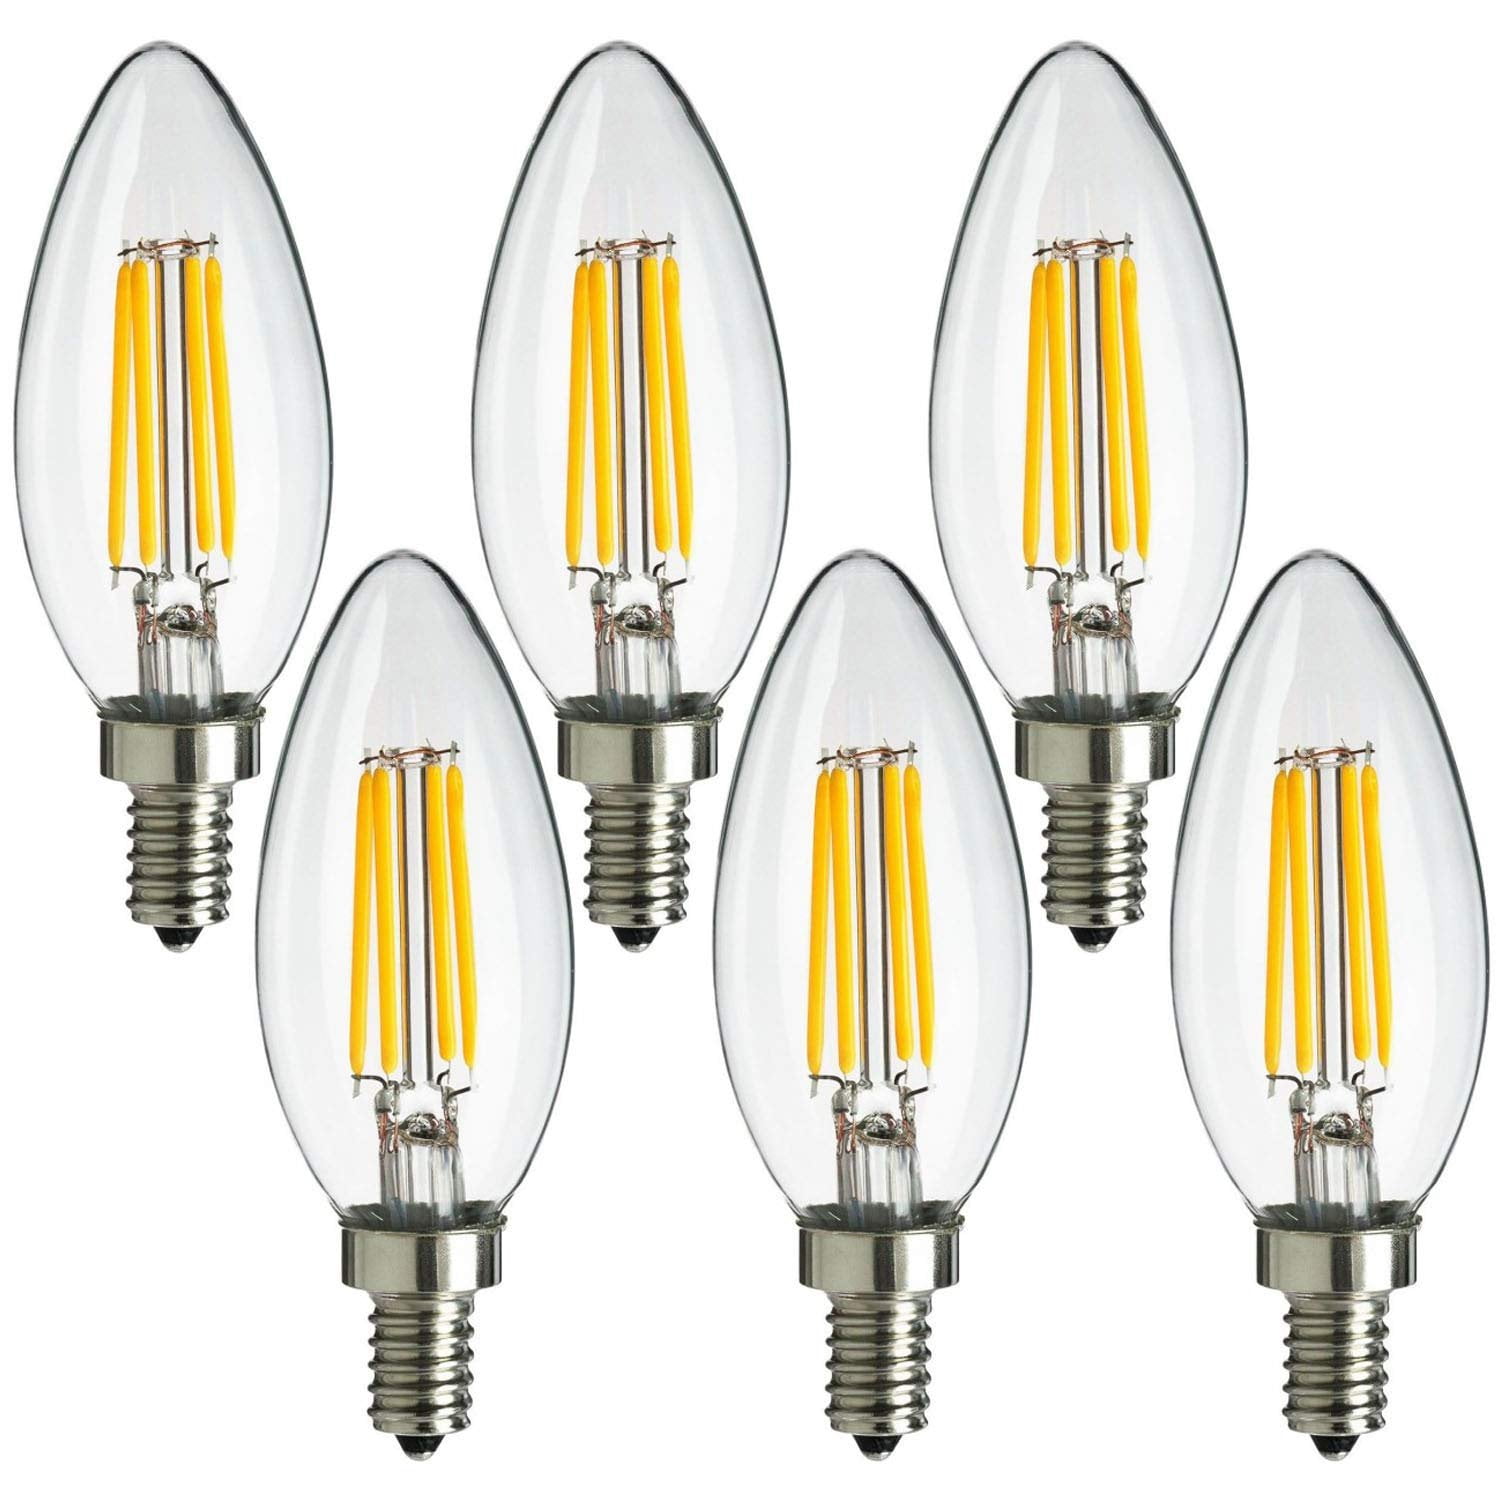 12x MaxLite LED Chandelier Bulbs 4W 40W Enclosed Fixture Rated Dimmable E12 